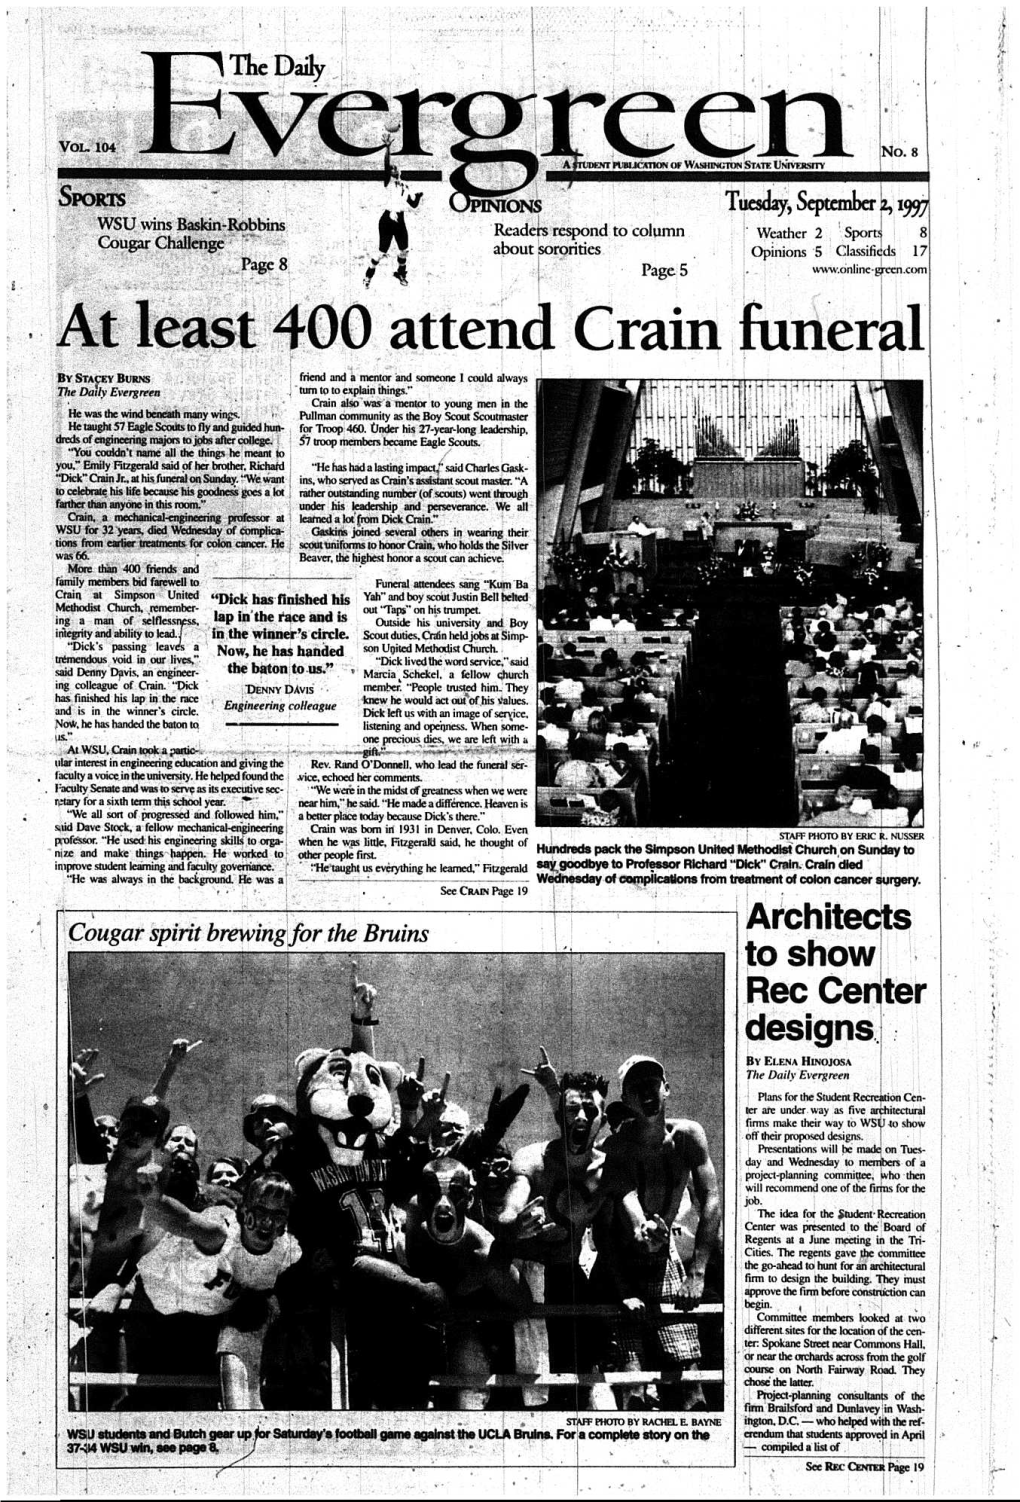 At Least 400 Attend Crain Funeral